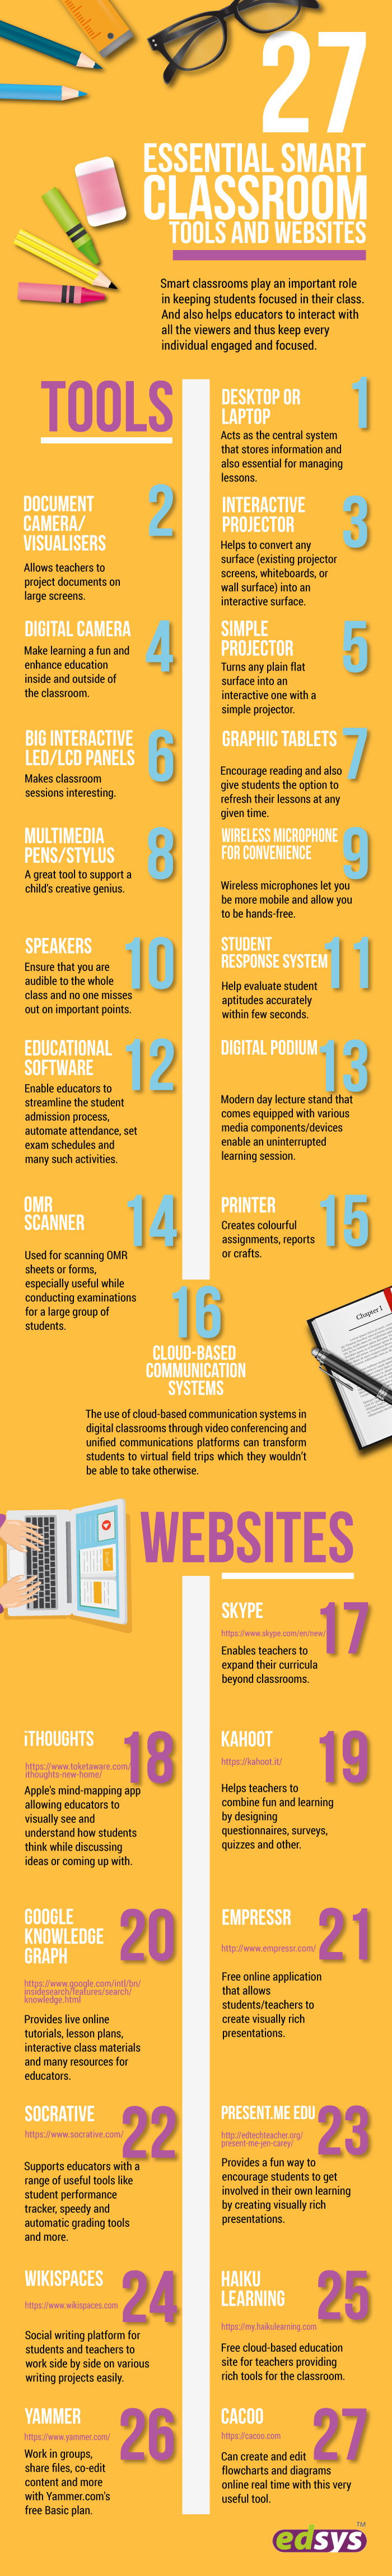 27 Essential Smart Classroom Tools and Websites infographic